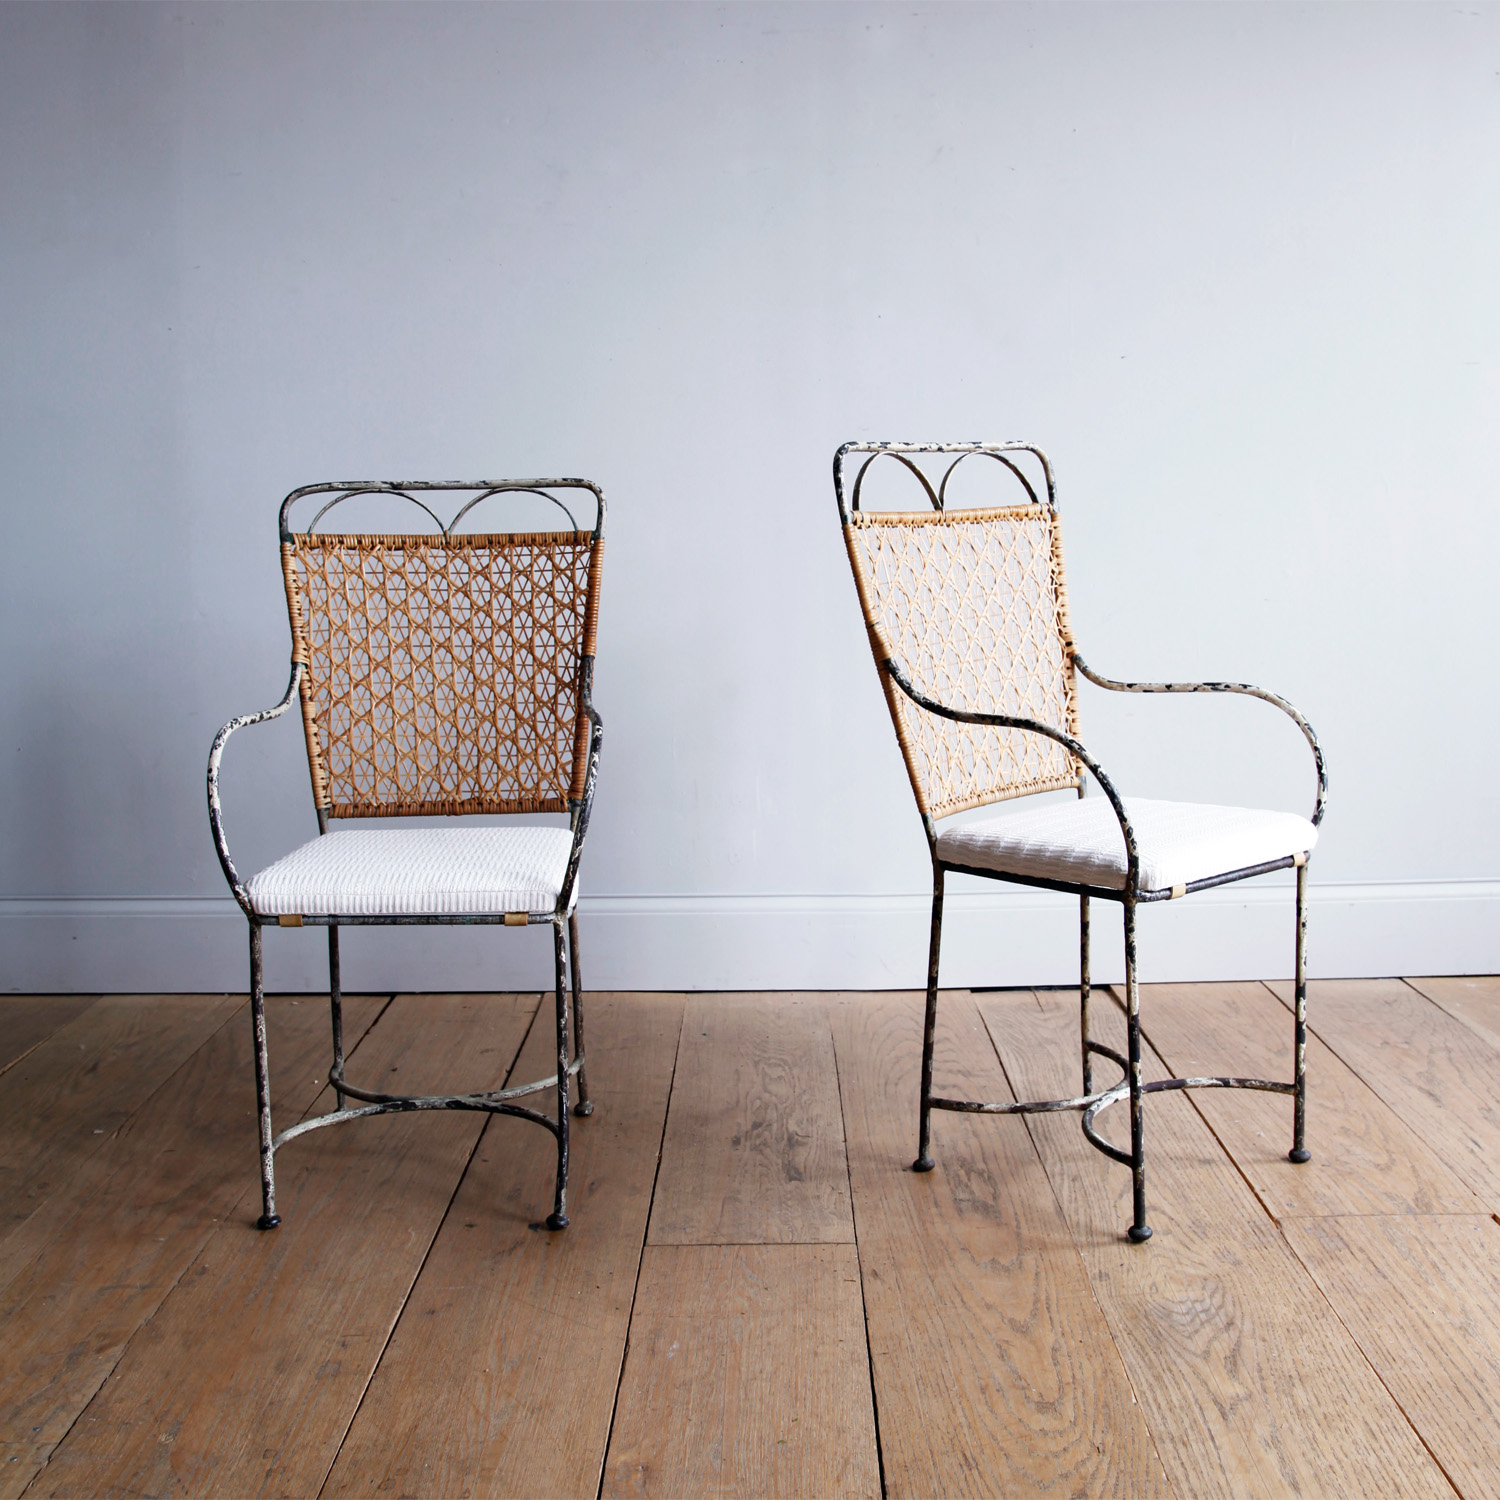 Pair of 1930s French Garden Chairs